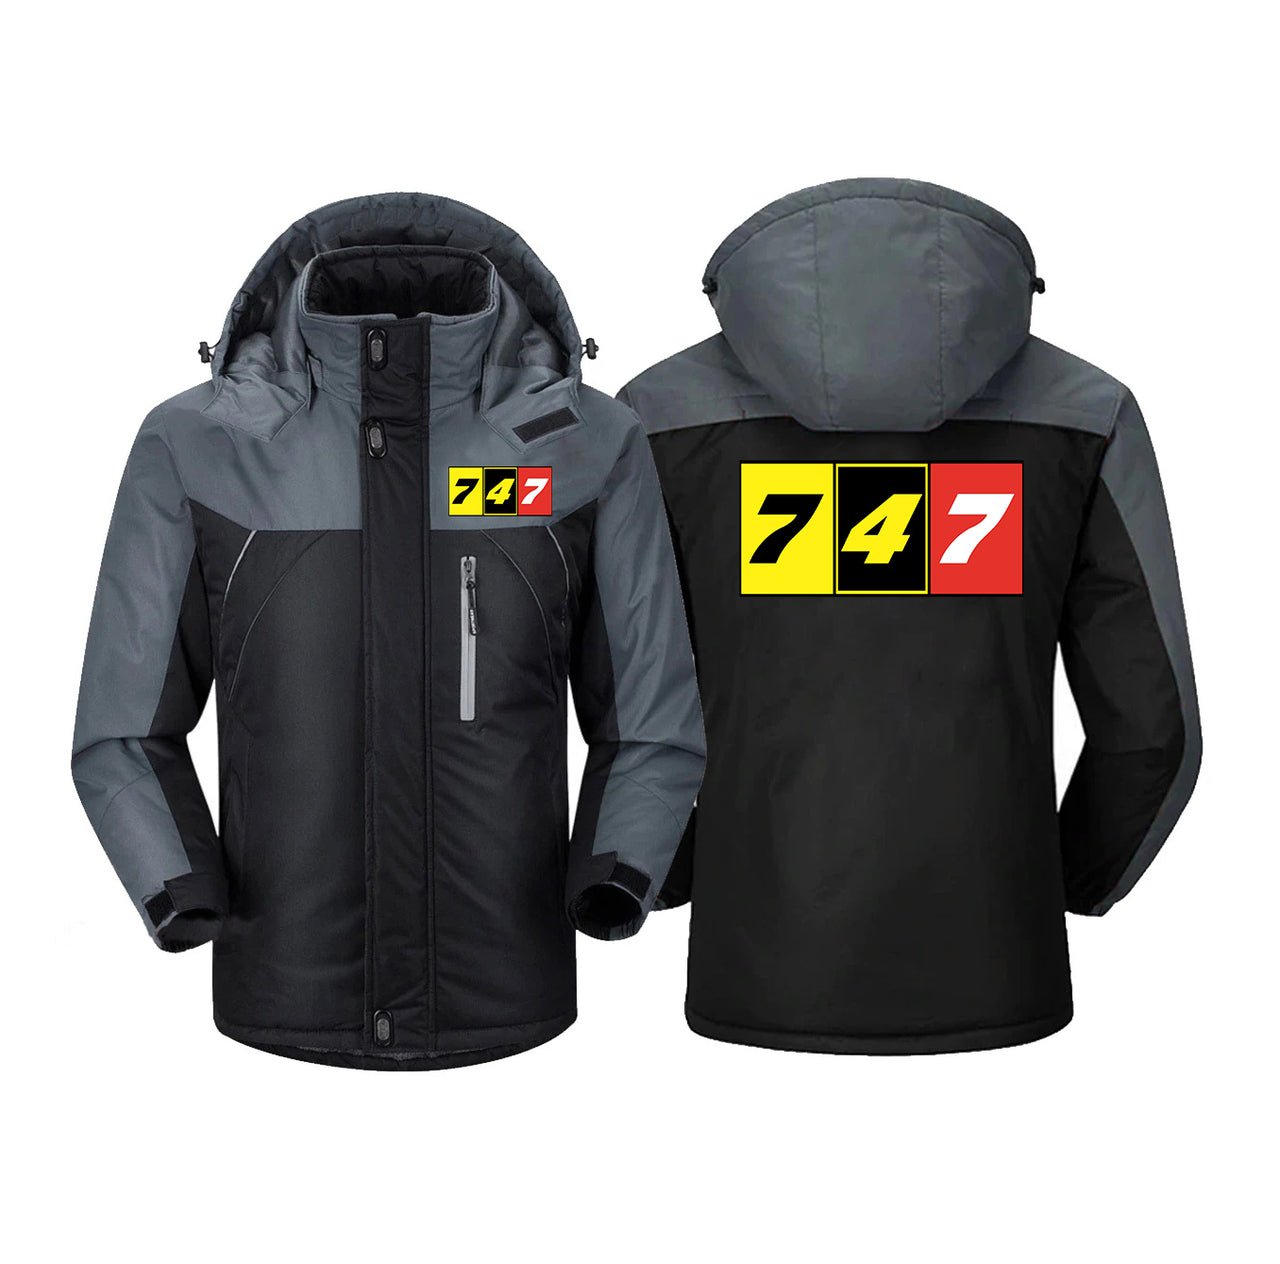 Flat Colourful 747 Designed Thick Winter Jackets